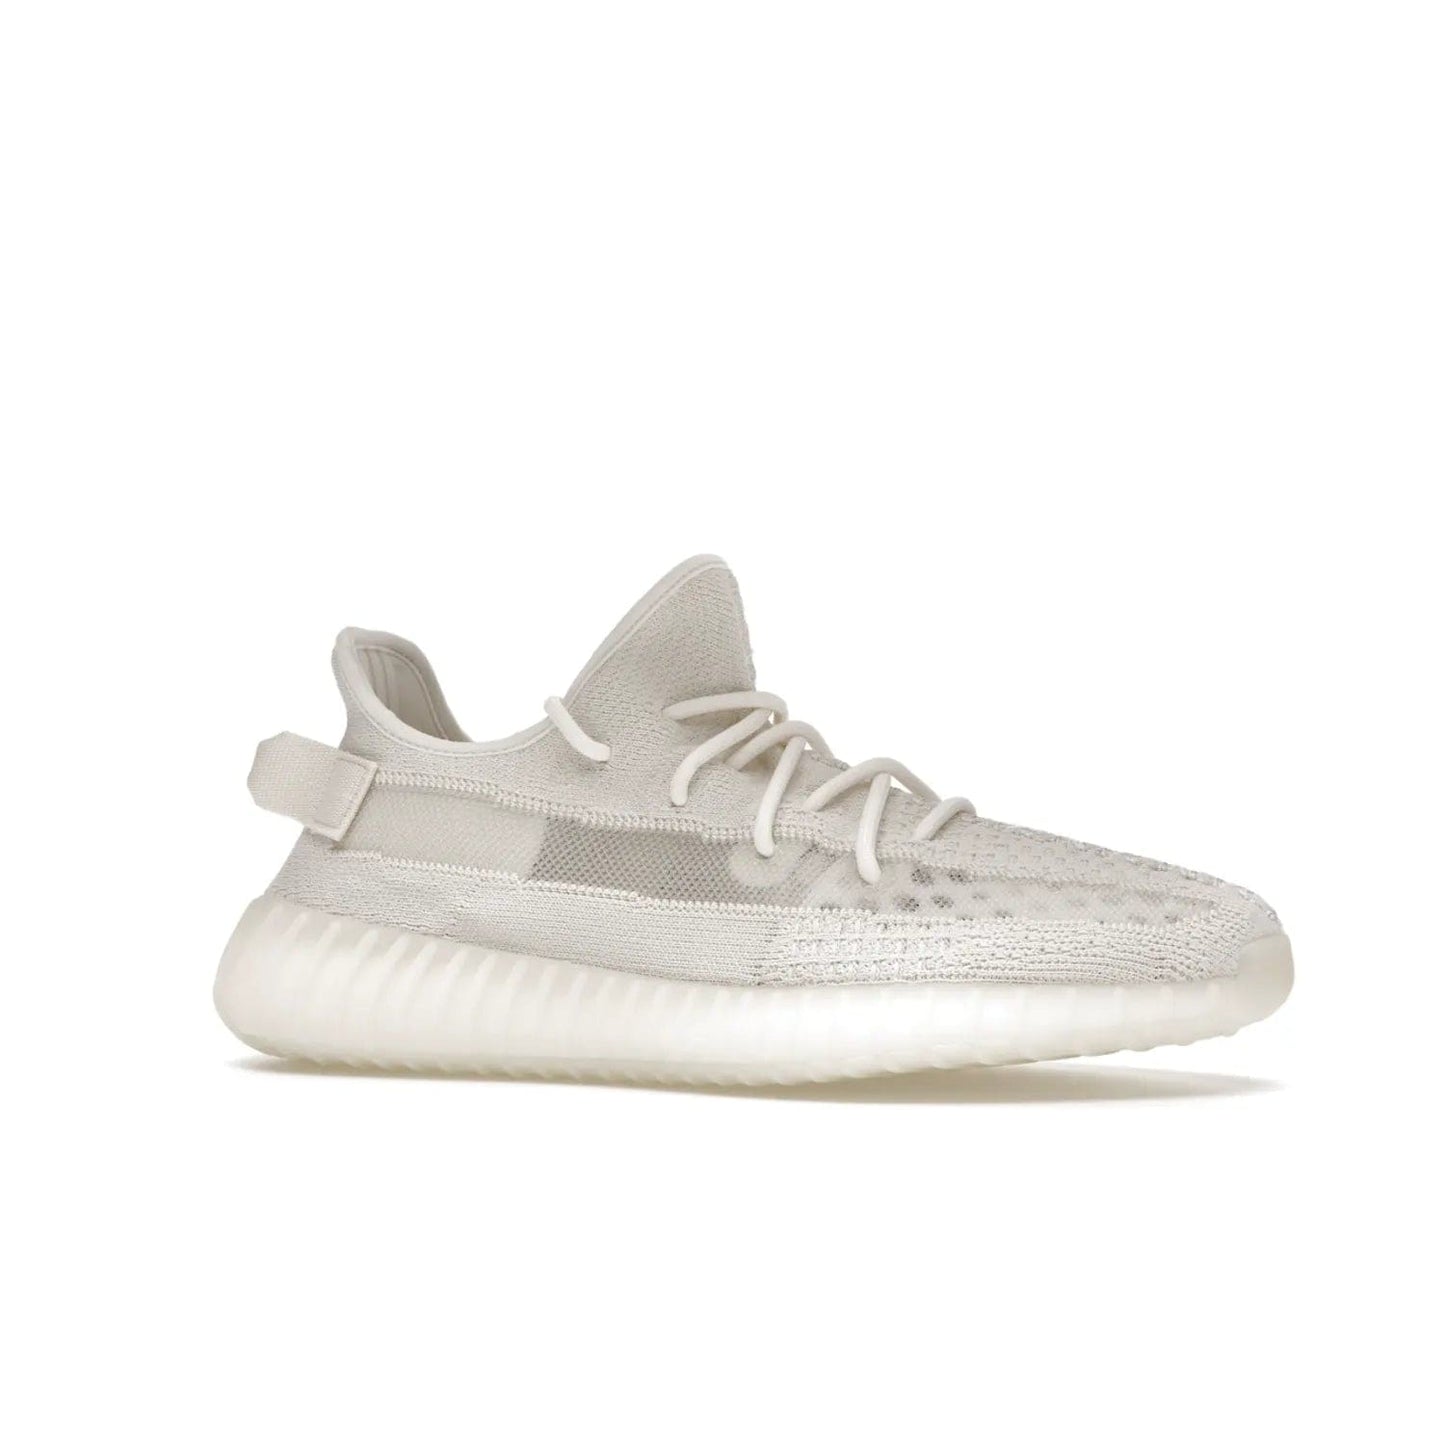 adidas Yeezy Boost 350 V2 Bone - Image 3 - Only at www.BallersClubKickz.com - Grab the stylish and comfortable adidas Yeezy Boost 350 V2 Bone in March 2022. This sneaker features a triple white Primeknit upper, mesh side stripes and canvas heel tabs, sitting atop a semi-translucent sole with Boost technology. Sure to keep your feet comfortable and stylish!